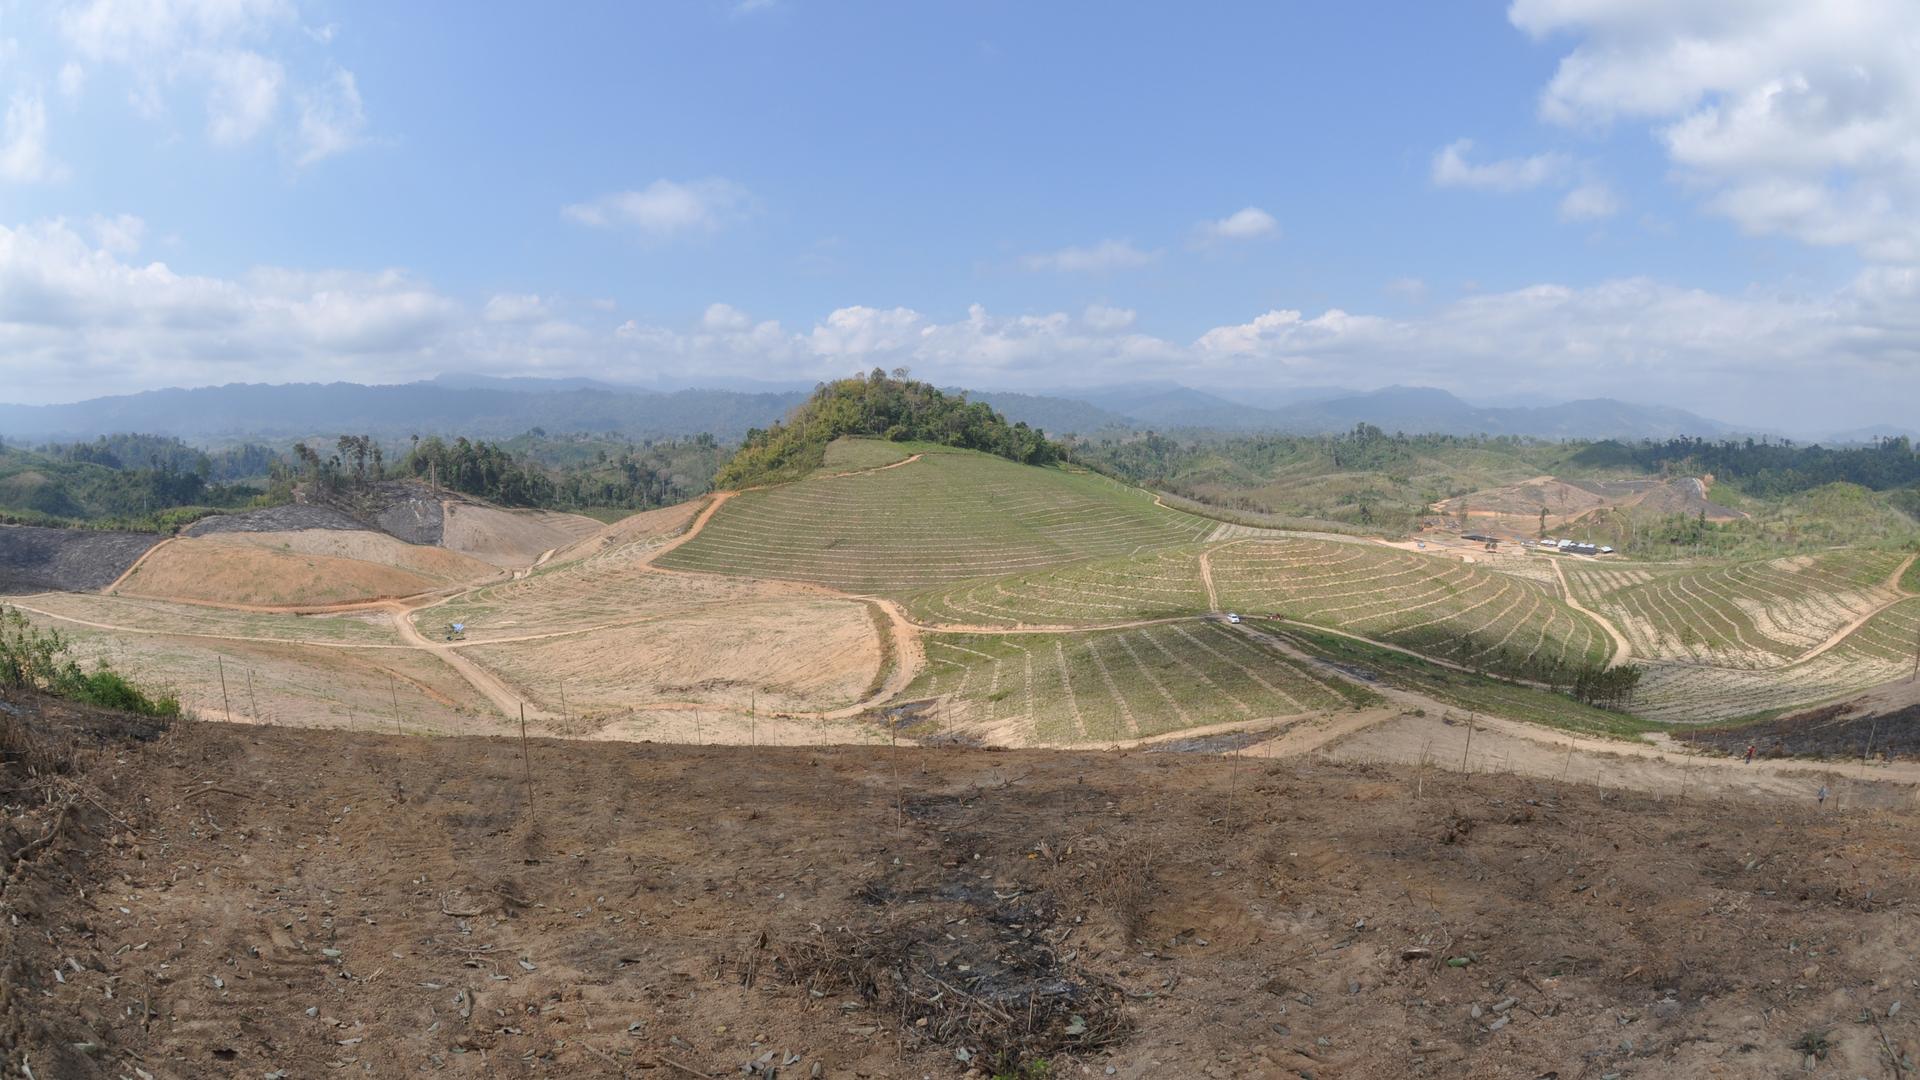 A forest area in Xayabouri, Laos cleared to plant rubber trees.